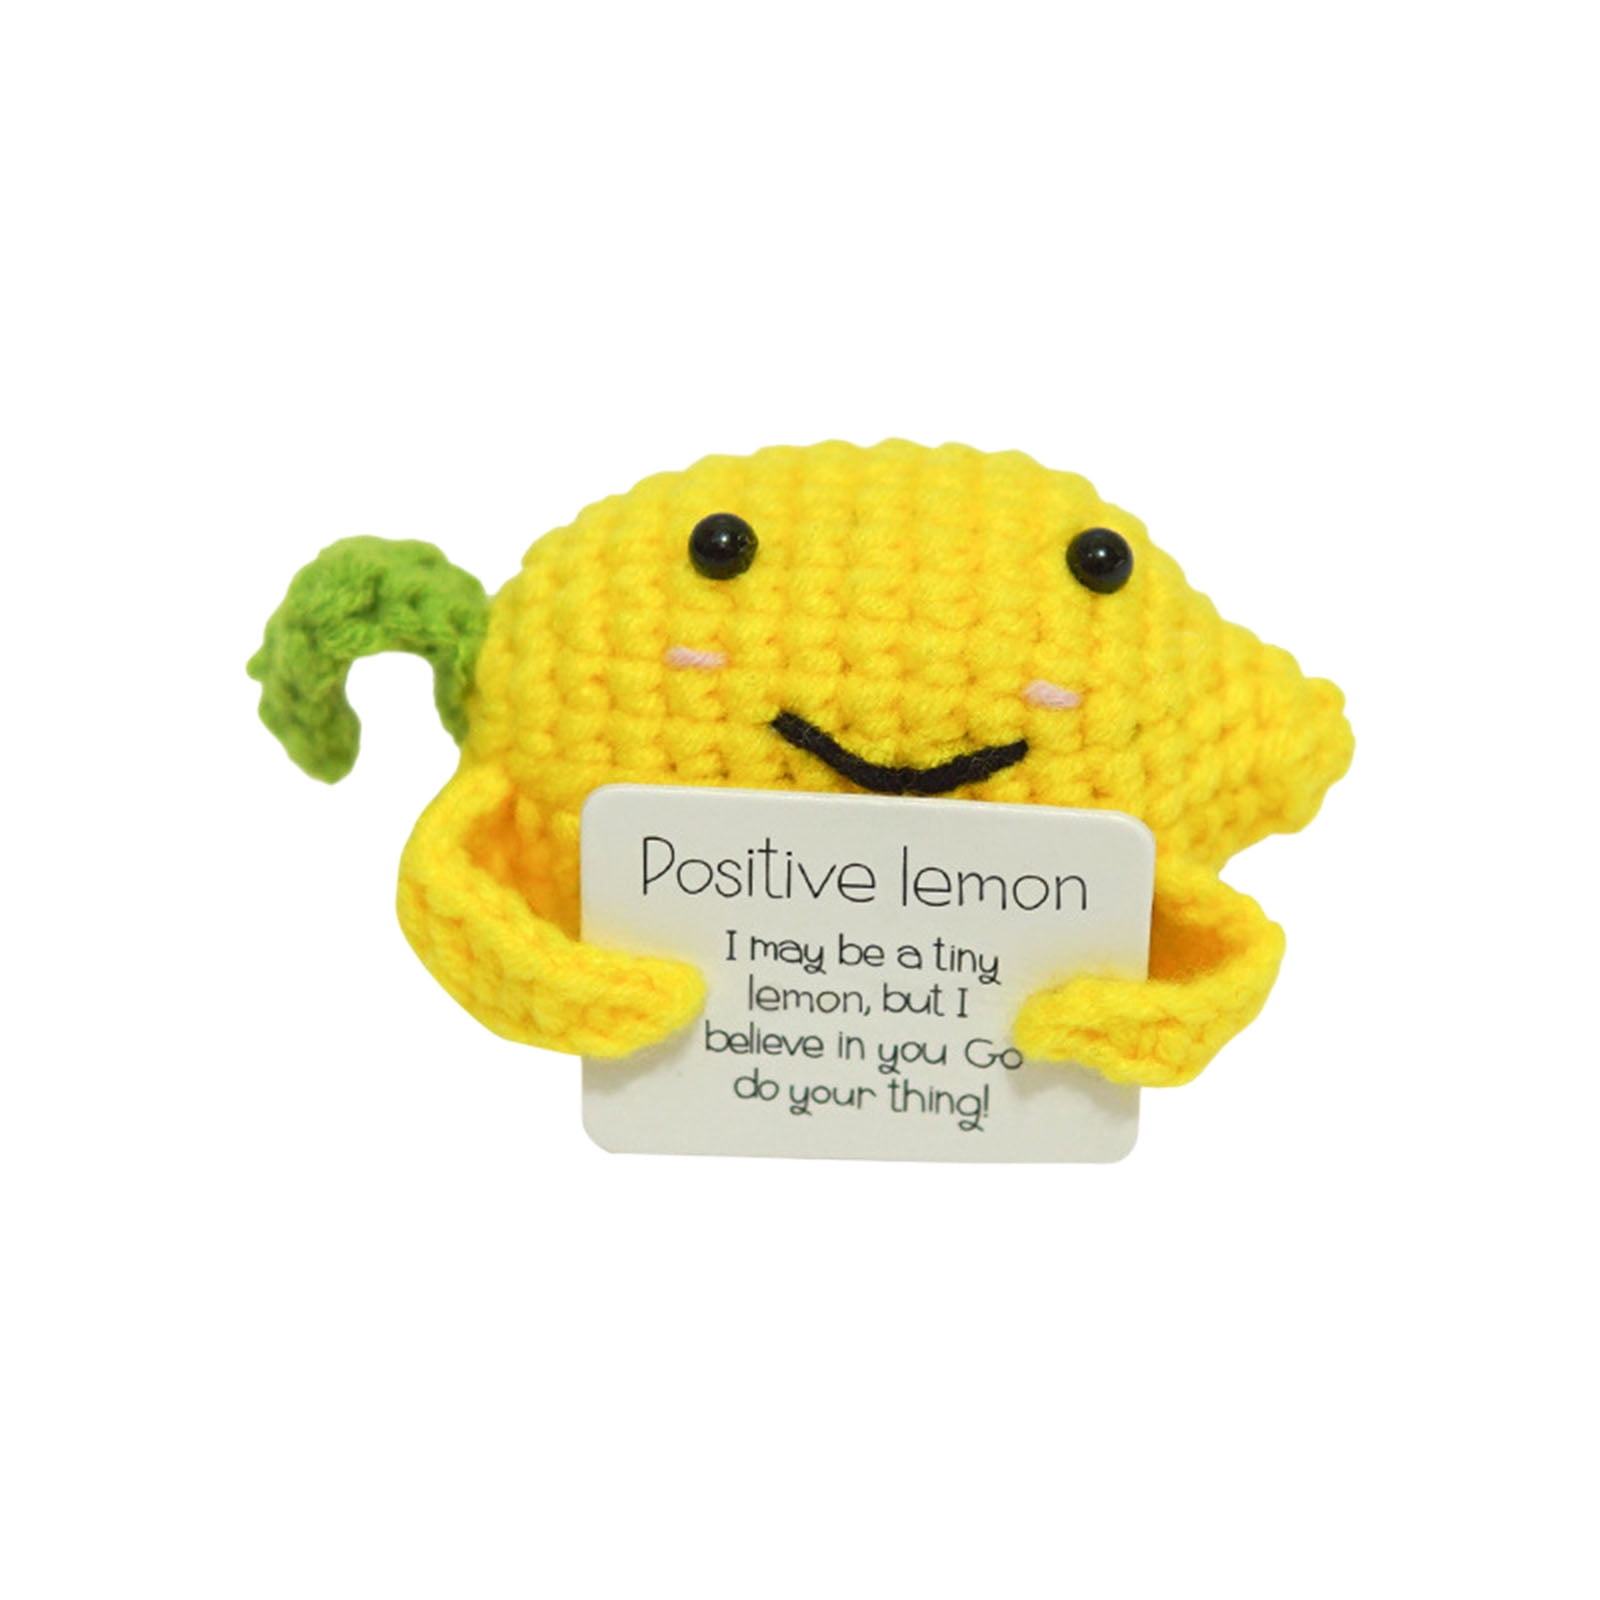 Give me the strength to fill the emotional support pocket pickle jar. :  r/crochet